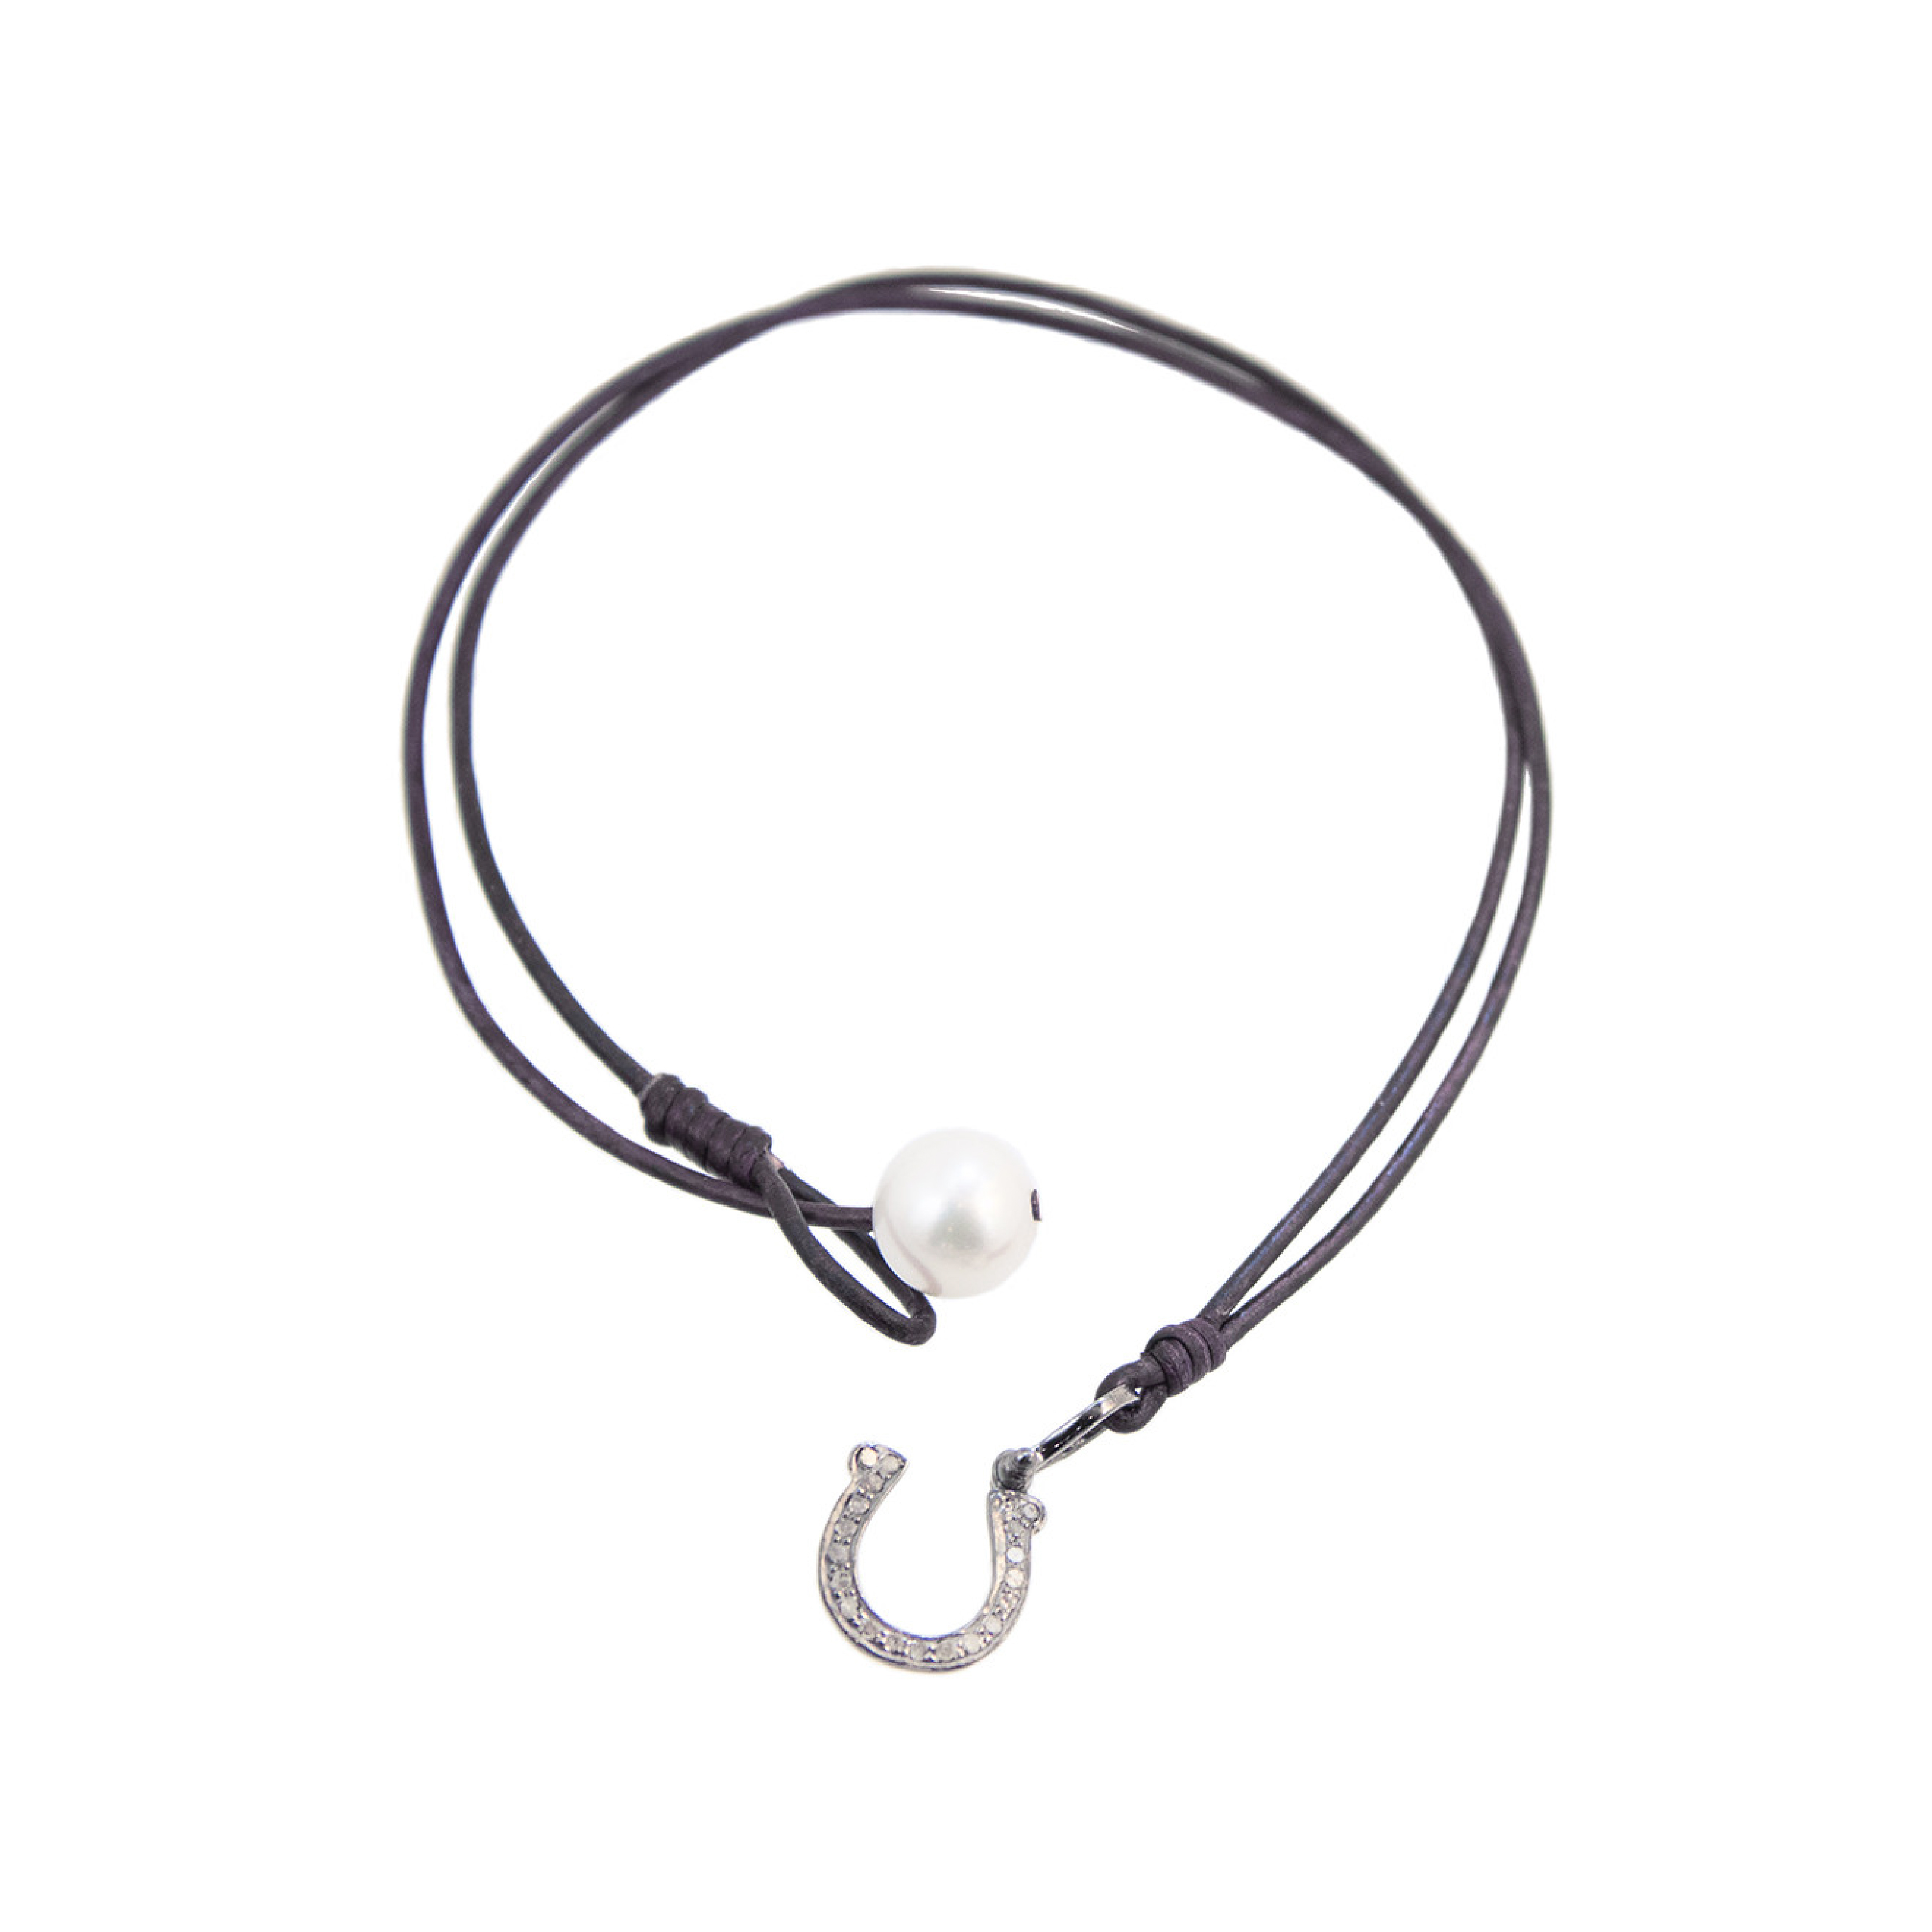 https://www.nfoxjewelers.com/upload/product/VINCENT PEACH PREMIUM LEATHER NECKLACE WITH DIAMOND HORSESHOE PENDANT WITH A FRESHWATER PEARL TOGGLE